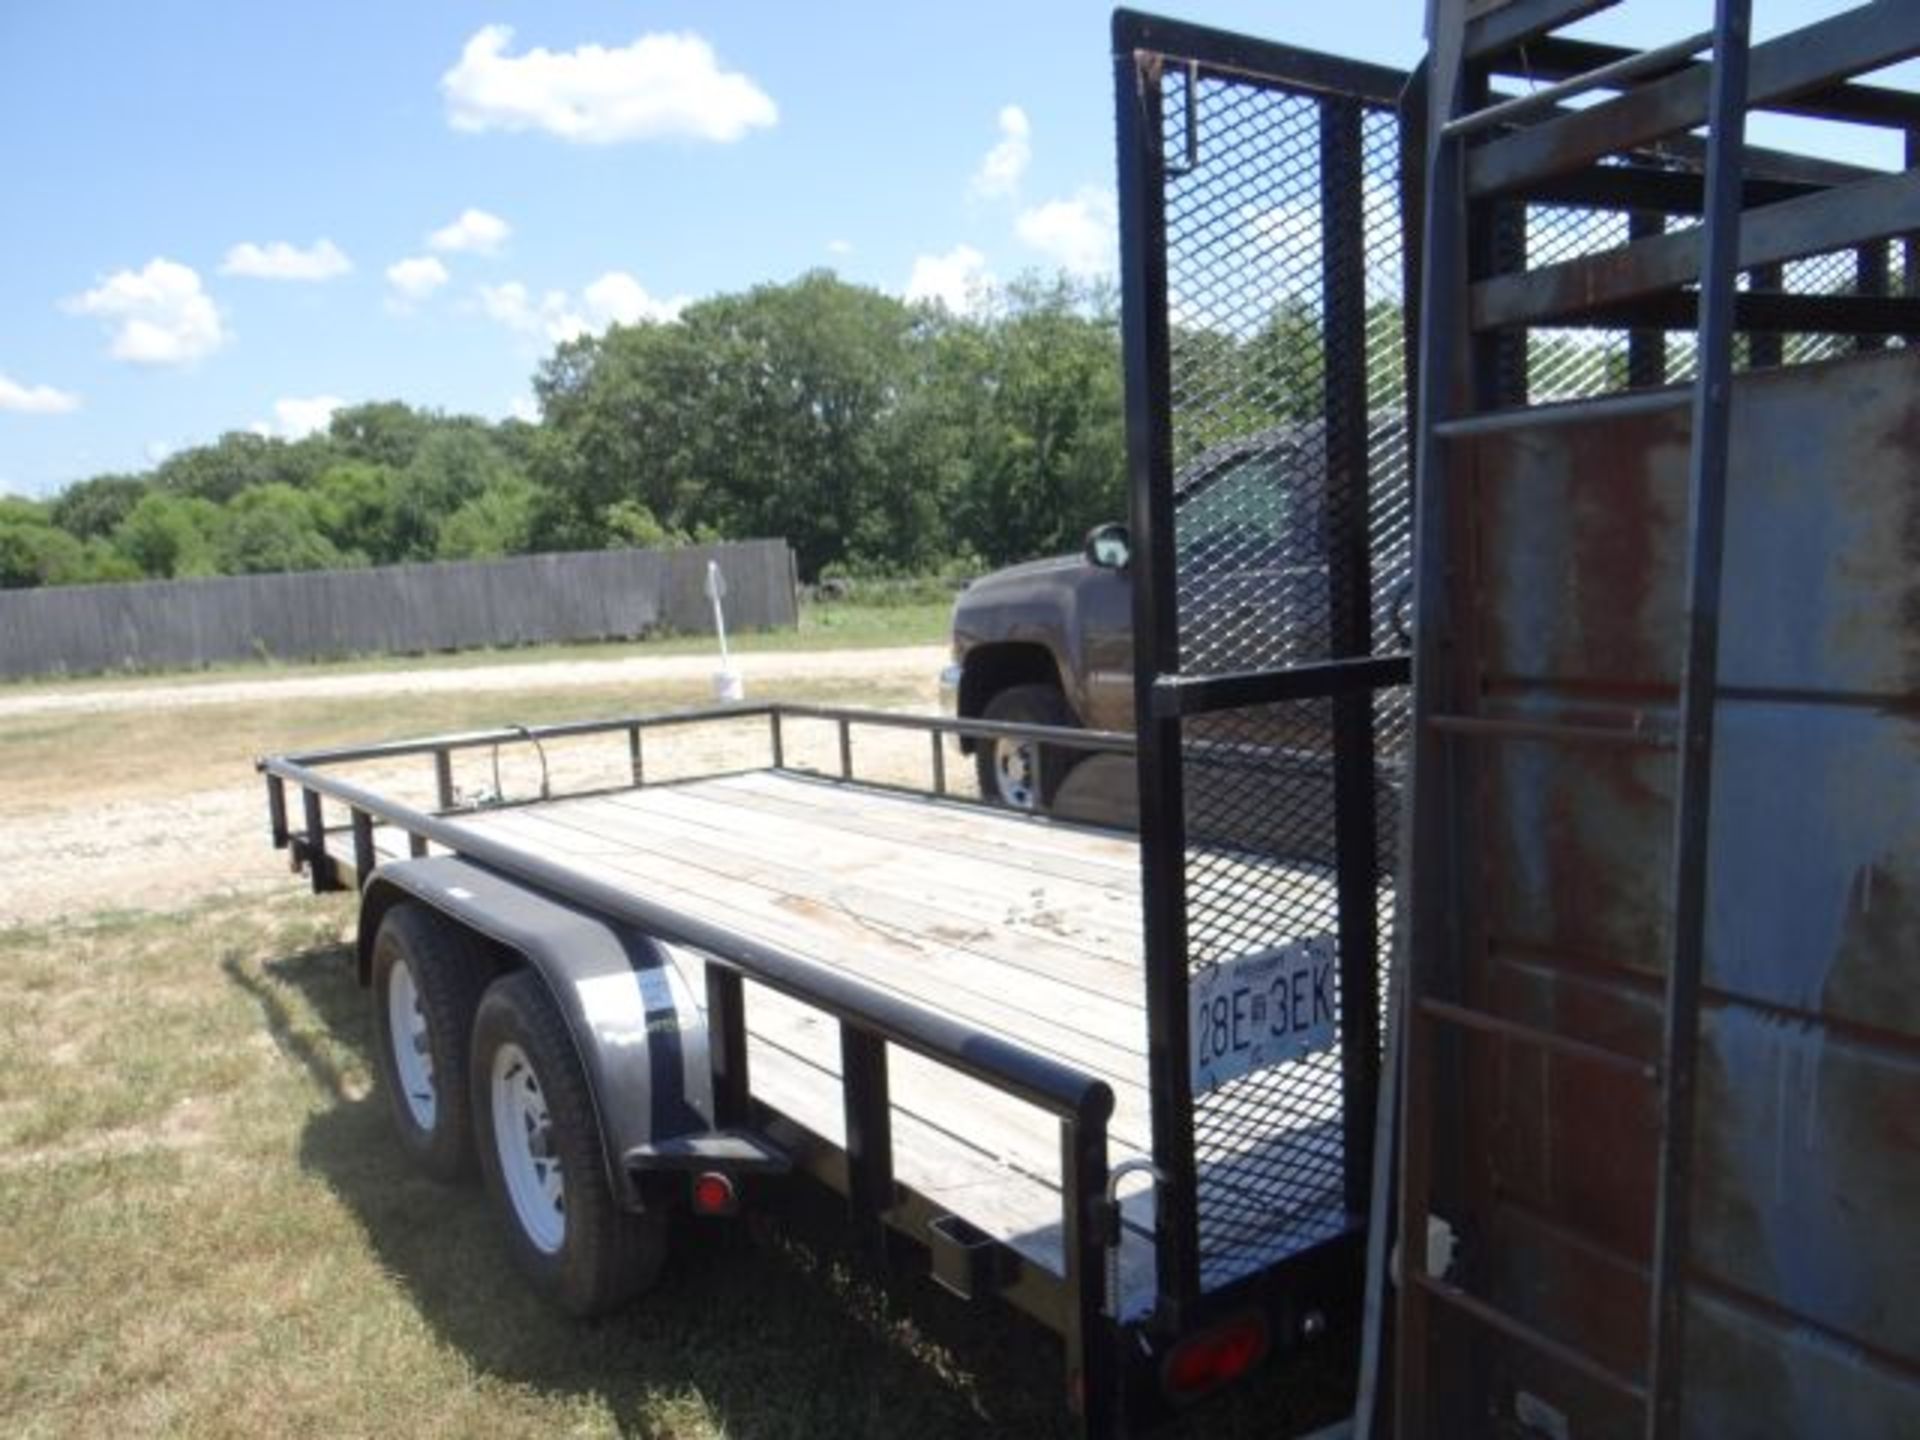 2013 DooLittle Flatbed Trailer 84"x16', Ramp Gate, Title in the Office, vin#03695 - Image 3 of 3